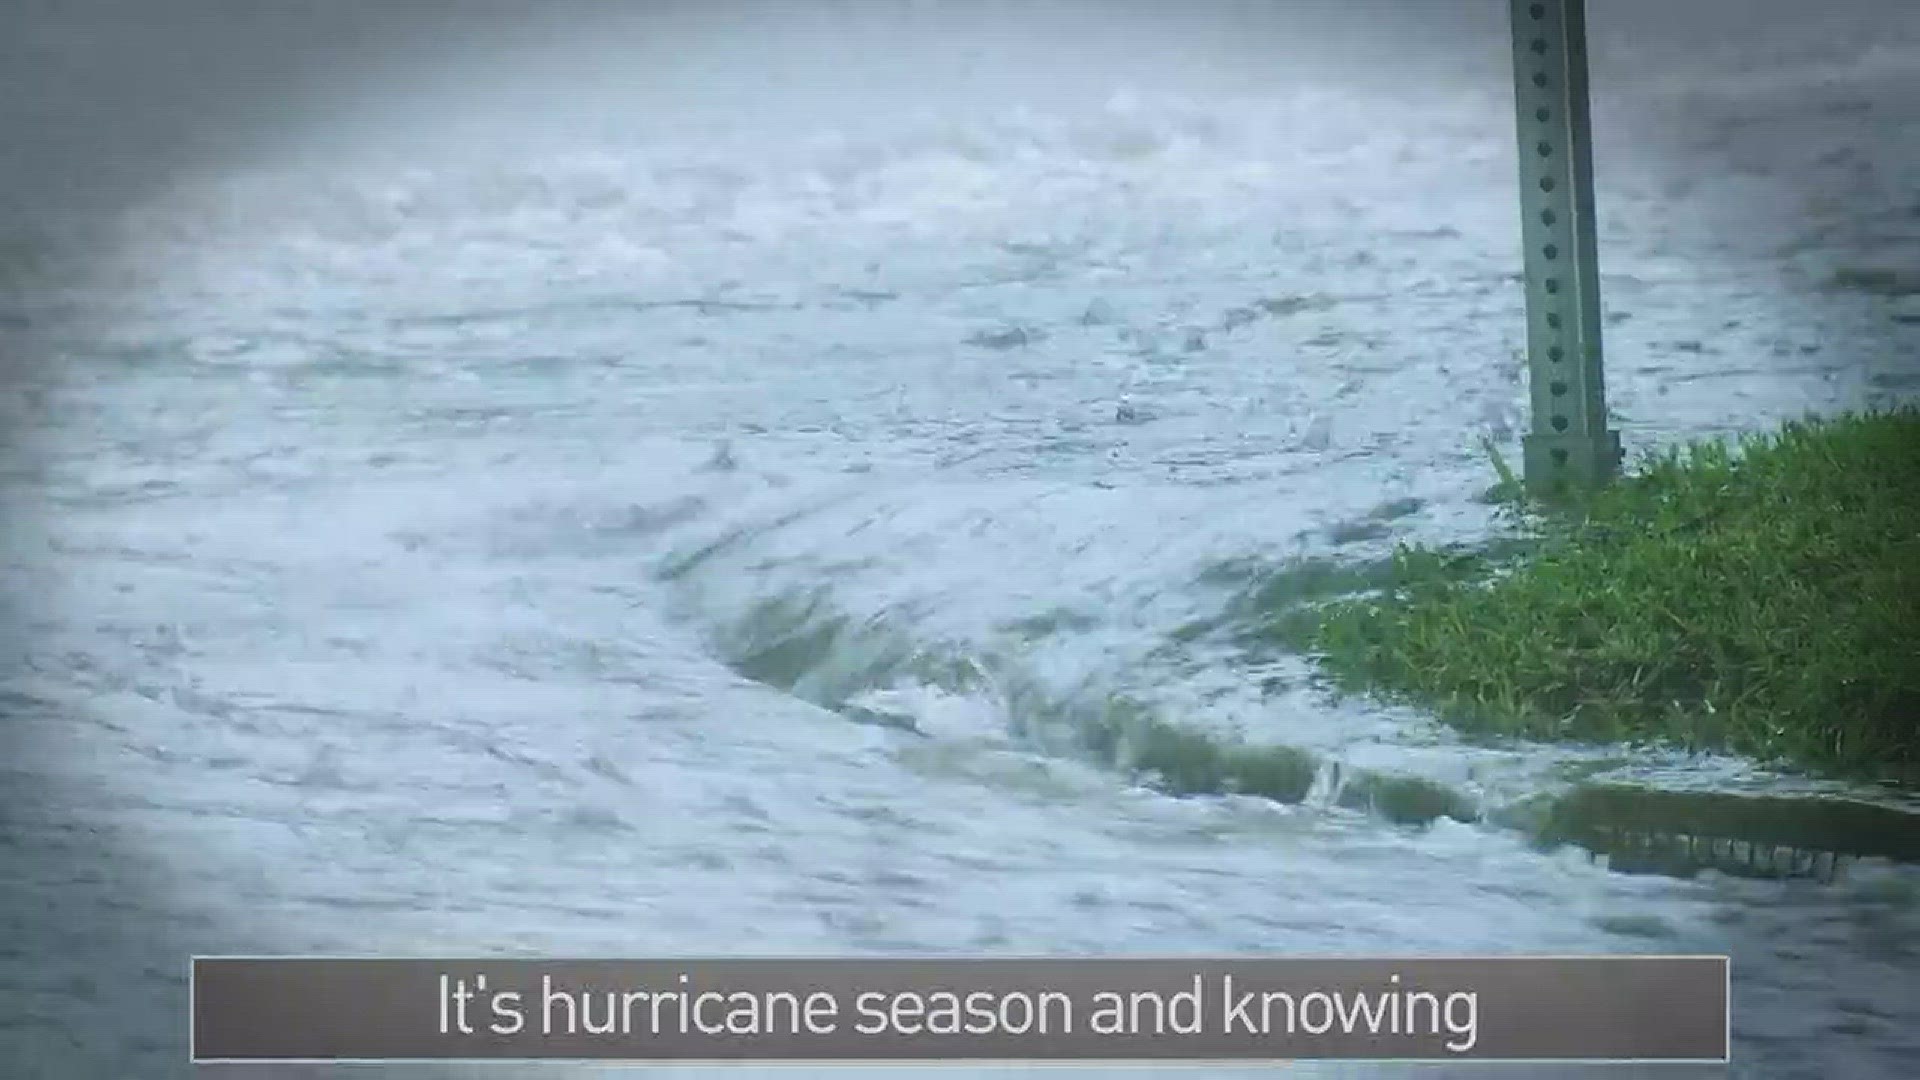 It's hurricane season, and here are some quick tips when observing weather patterns.